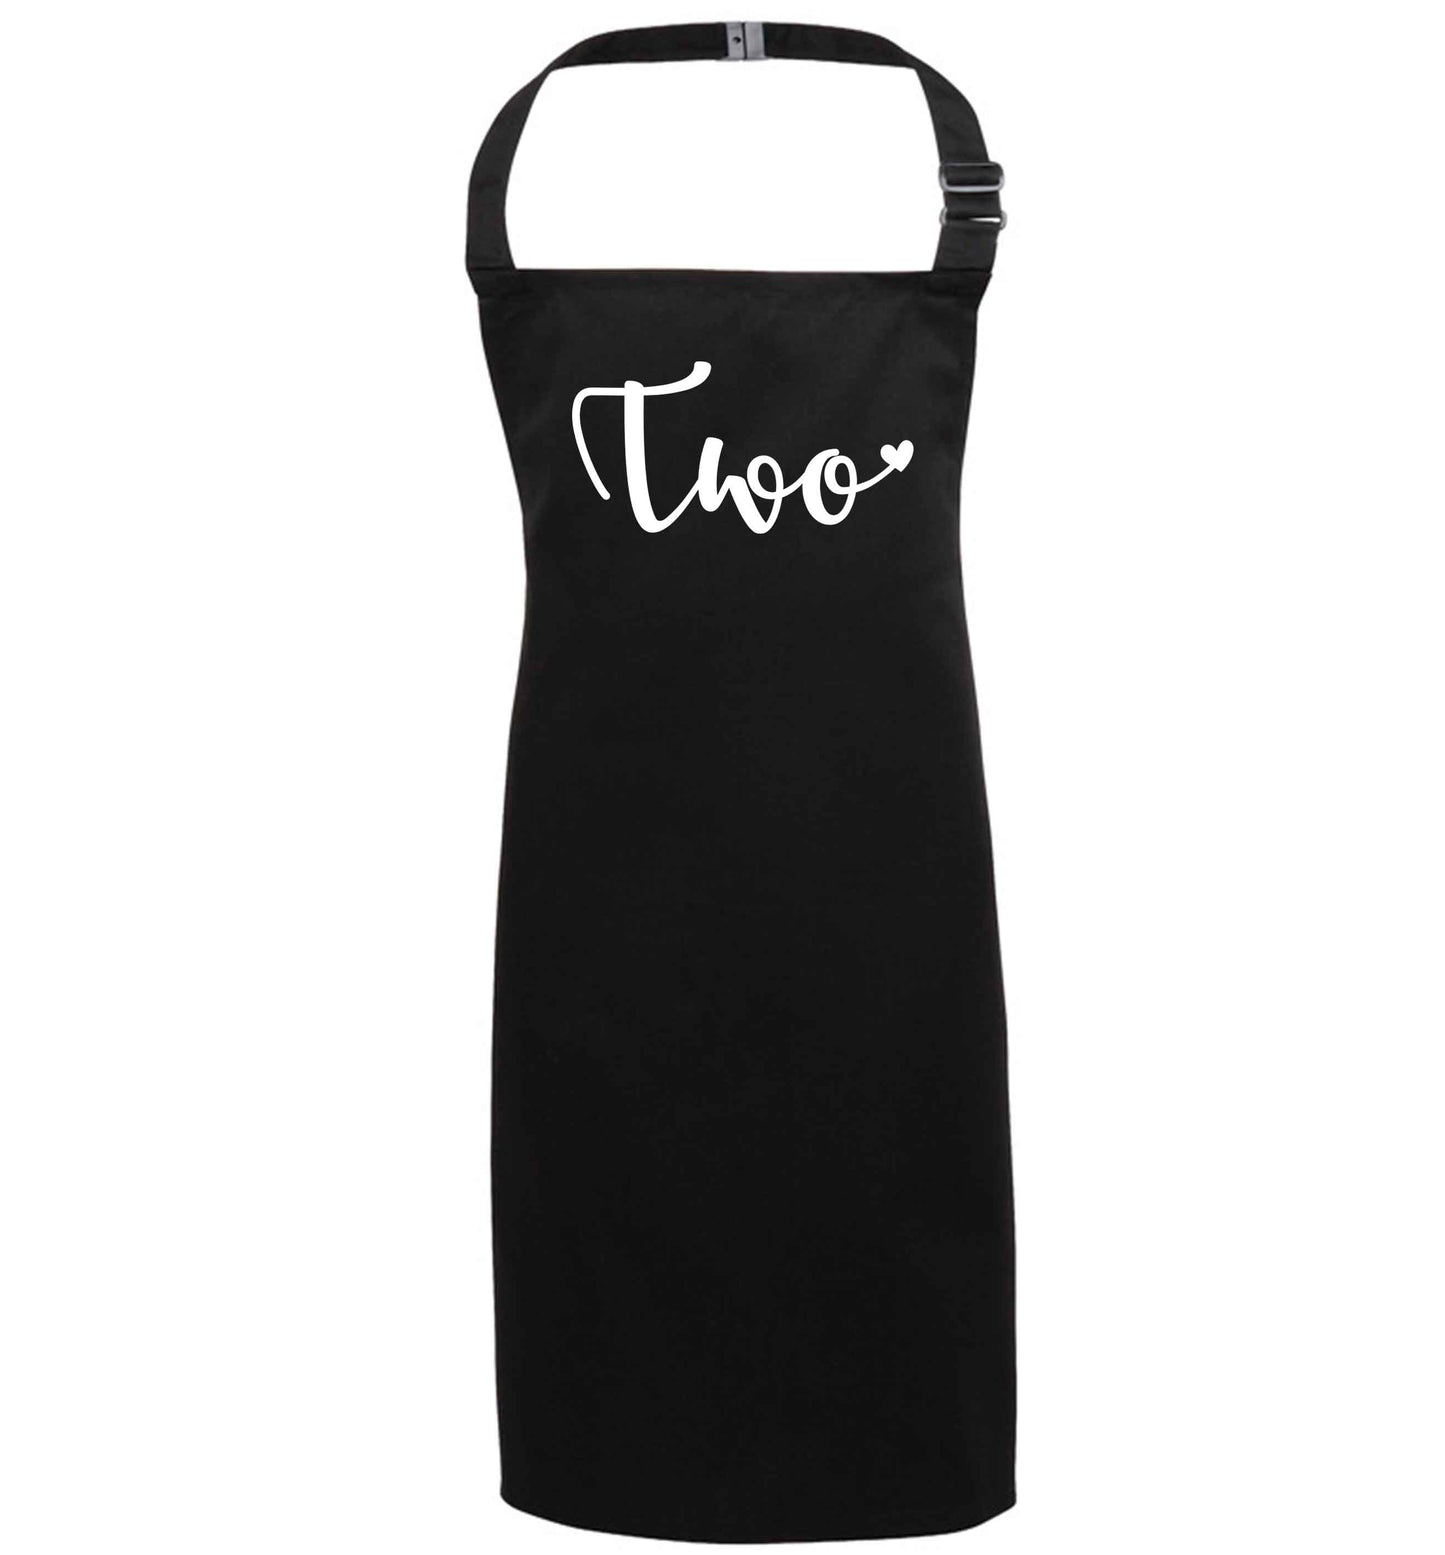 Two and Heart black apron 7-10 years